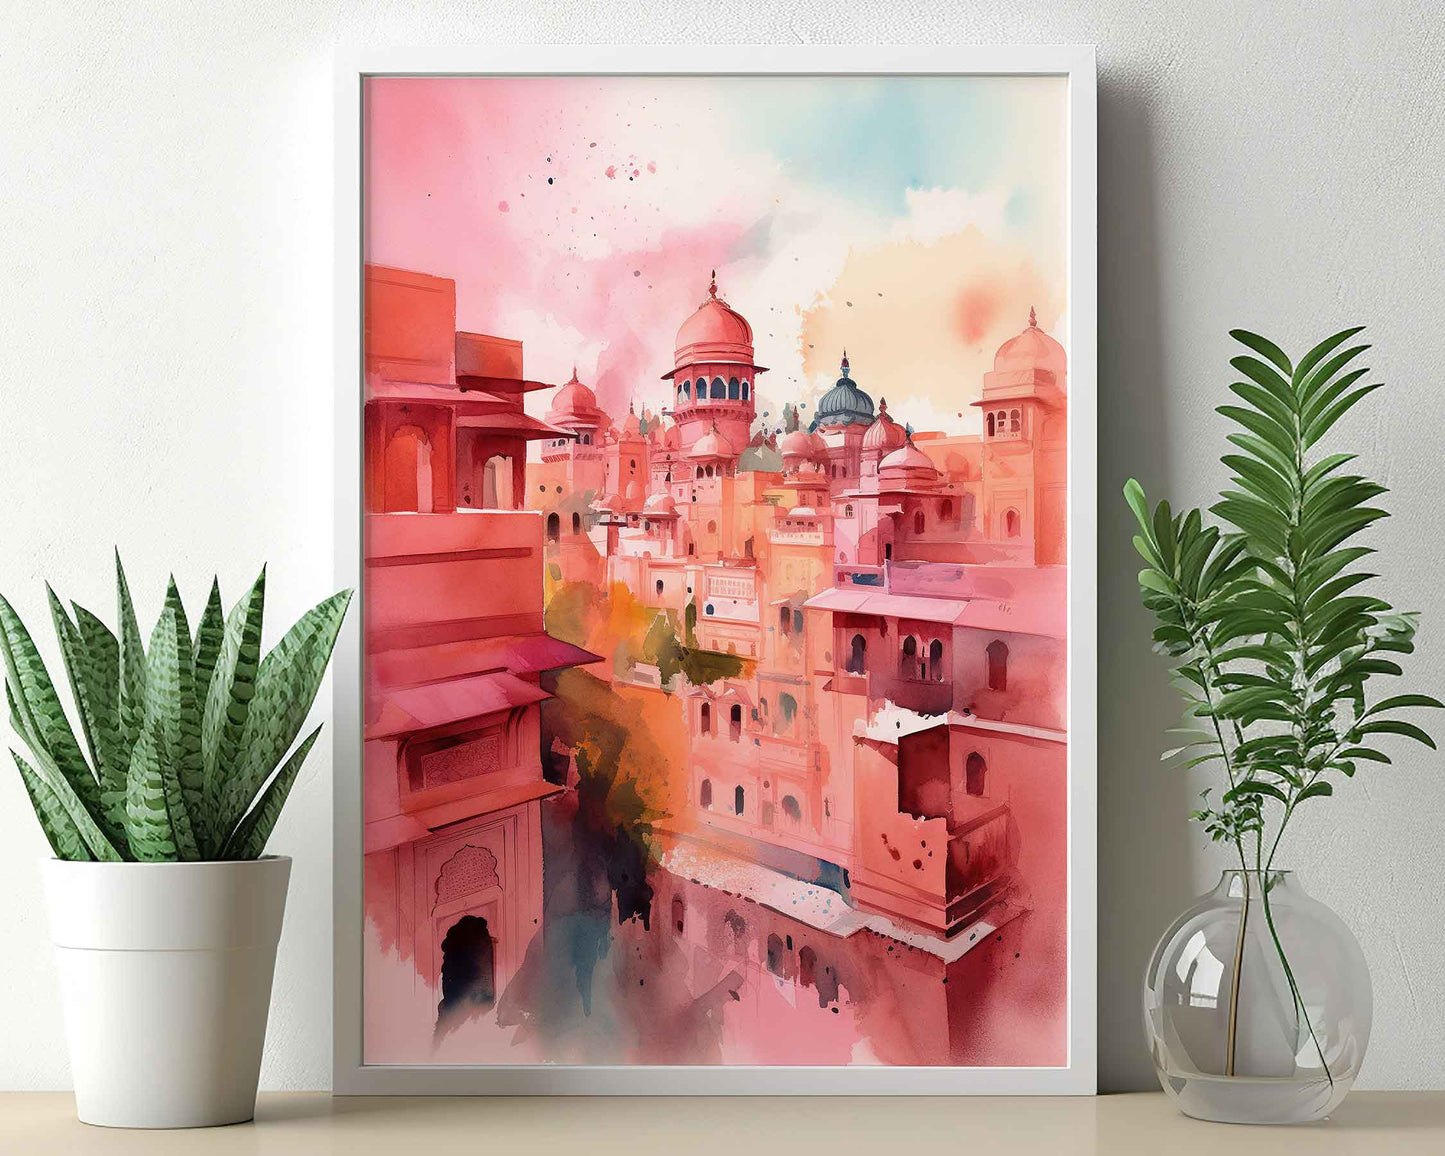 Framed Image of Jaipur Colourful Watercolour Pink Buildings Wall Art Prints